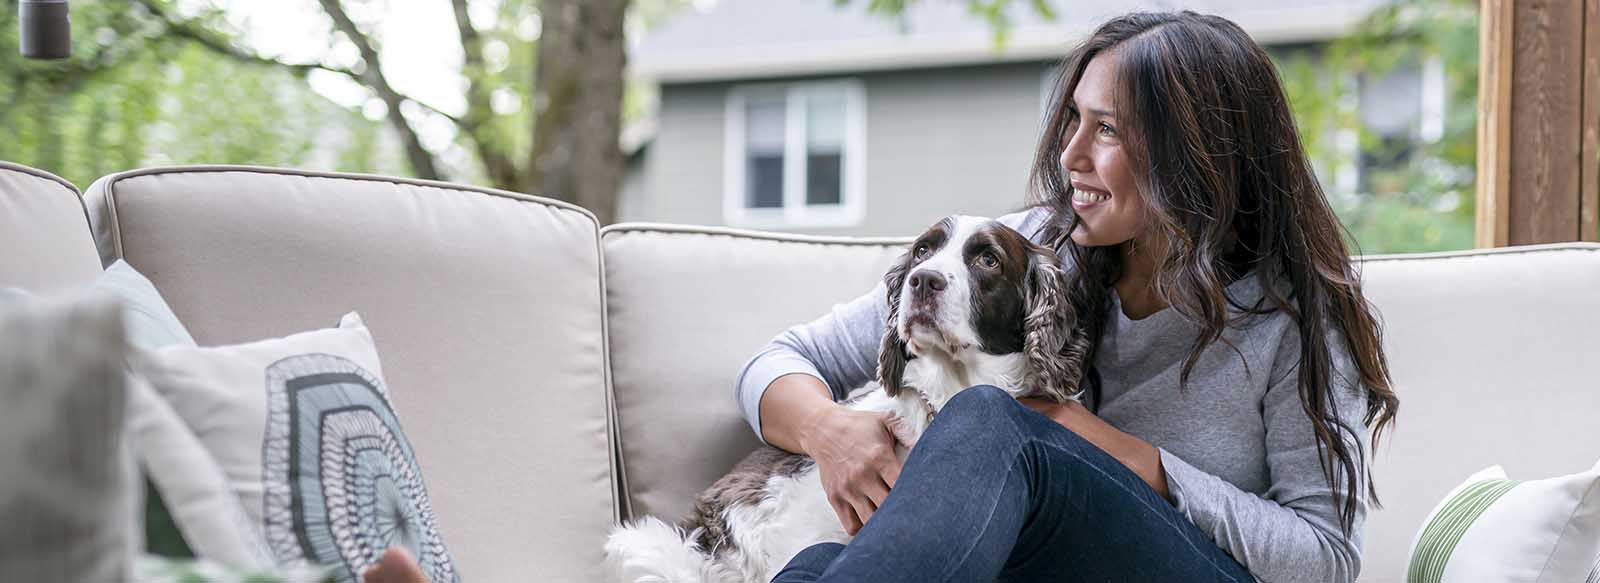 Person sitting on couch outside of home with dog